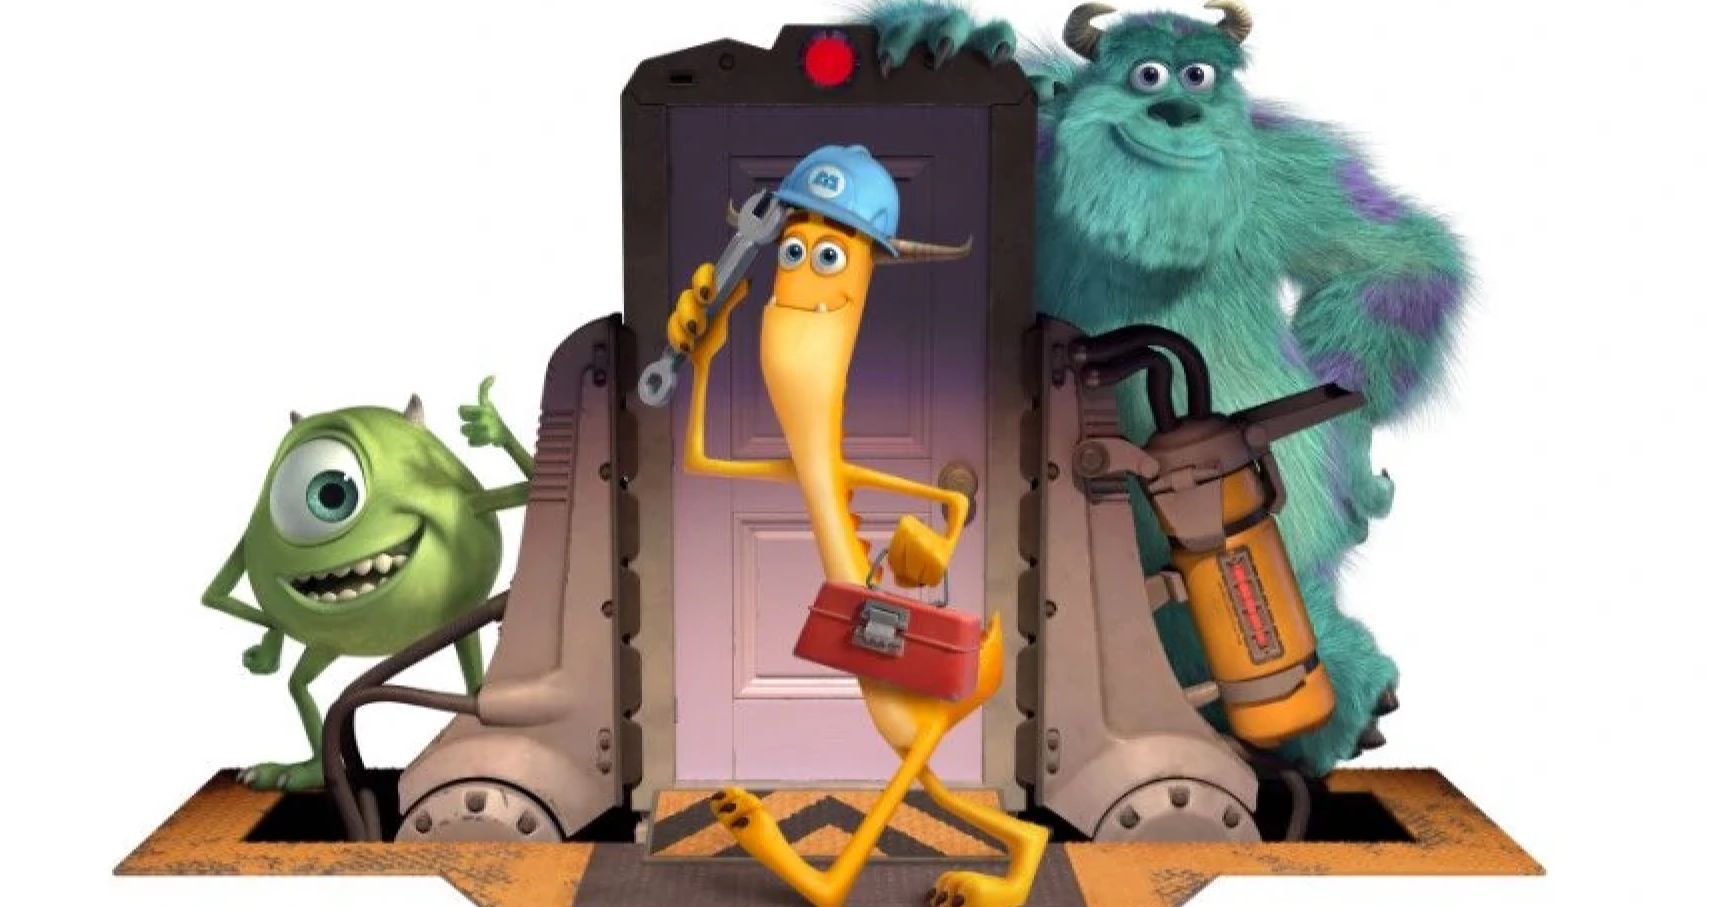 Monsters at Work Disney+ Series Is a True Sequel to Monsters, Inc. Confirms Billy Crystal